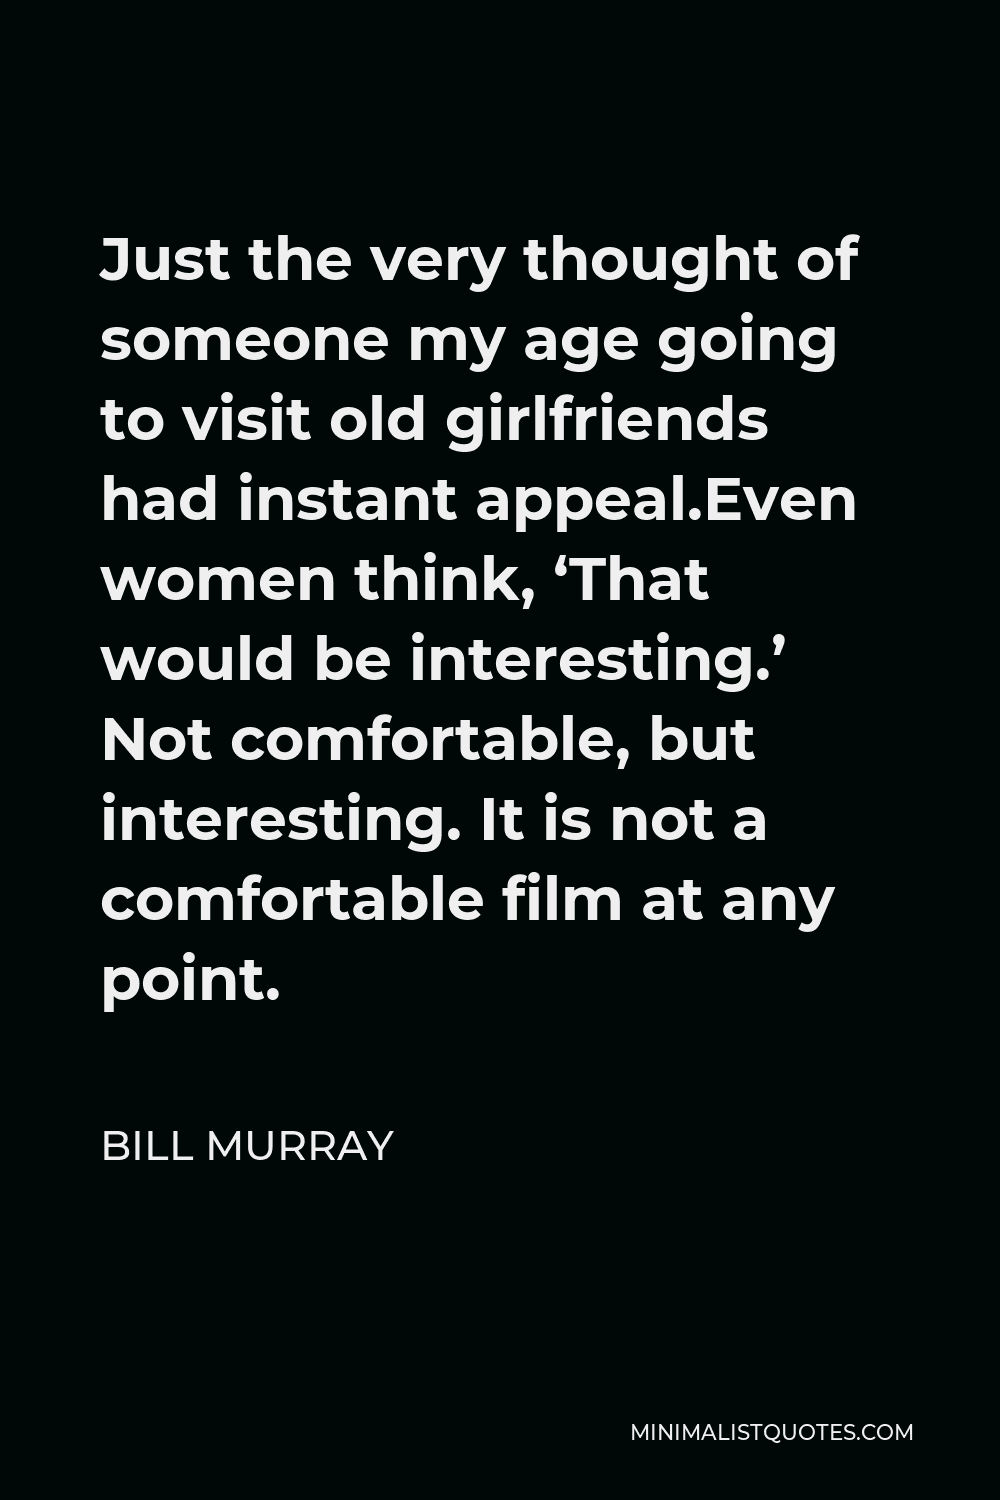 Bill Murray Quote - Just the very thought of someone my age going to visit old girlfriends had instant appeal.Even women think, ‘That would be interesting.’ Not comfortable, but interesting. It is not a comfortable film at any point.